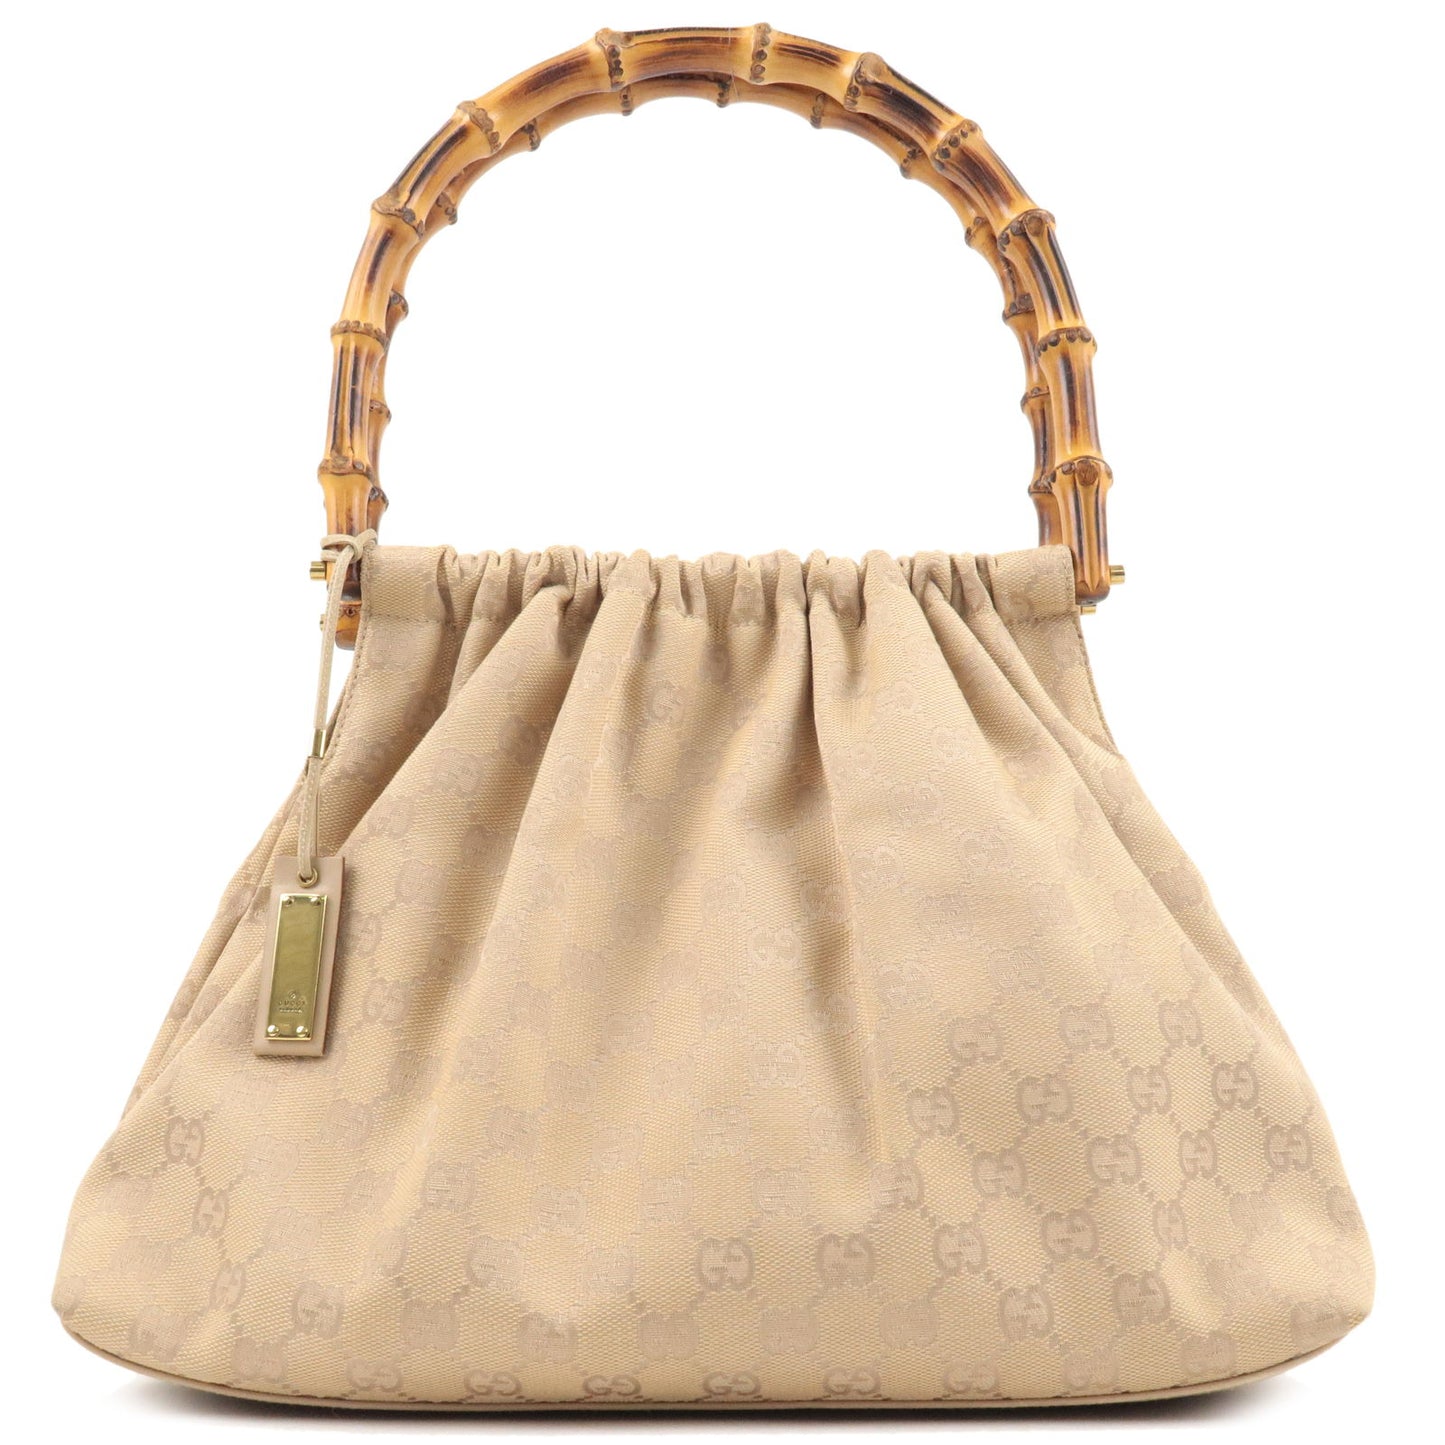 GUCCI-Bamboo-GG-Canvas-Leather-Shoulder-Bag-Beige-92708